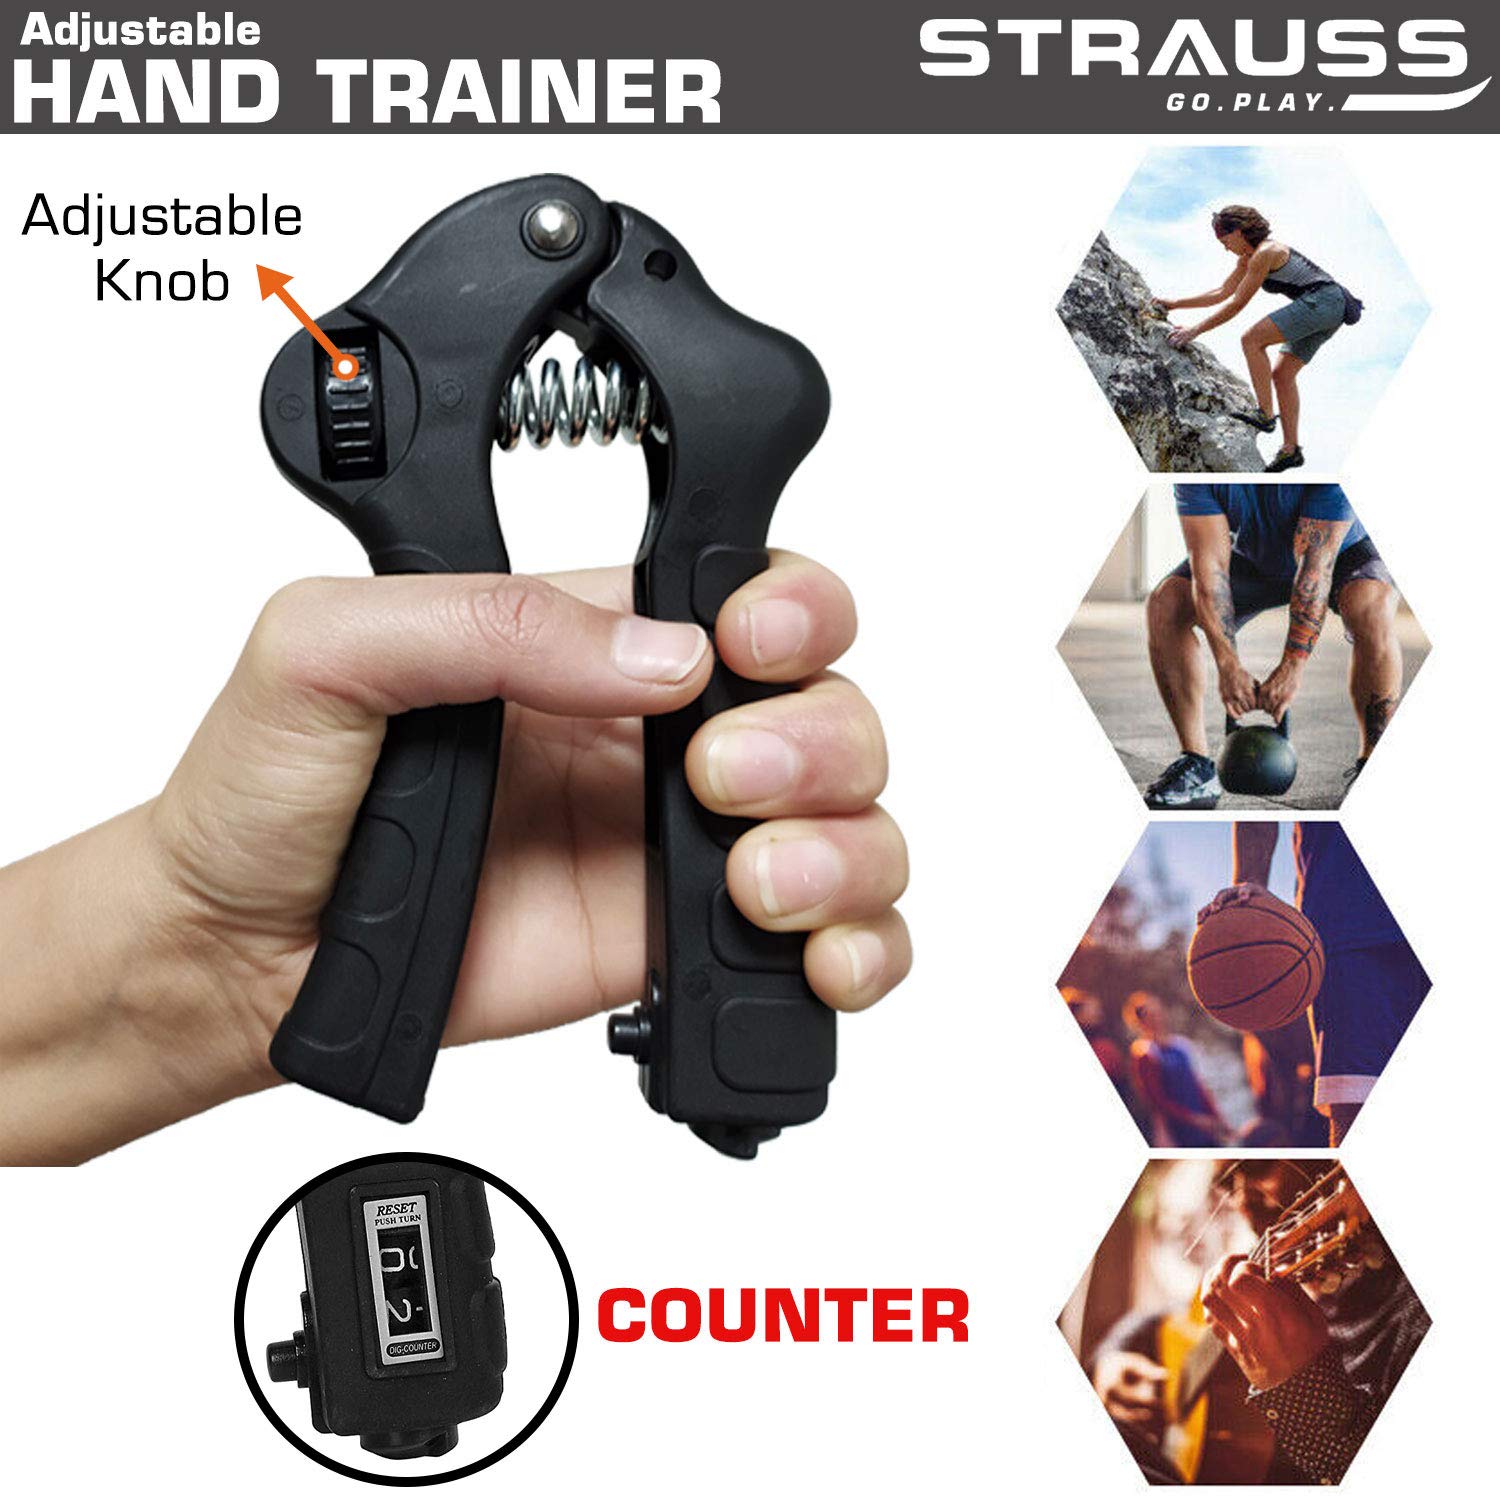 Strauss Adjustable Hand Grip Strengthener with Counter, (Black)